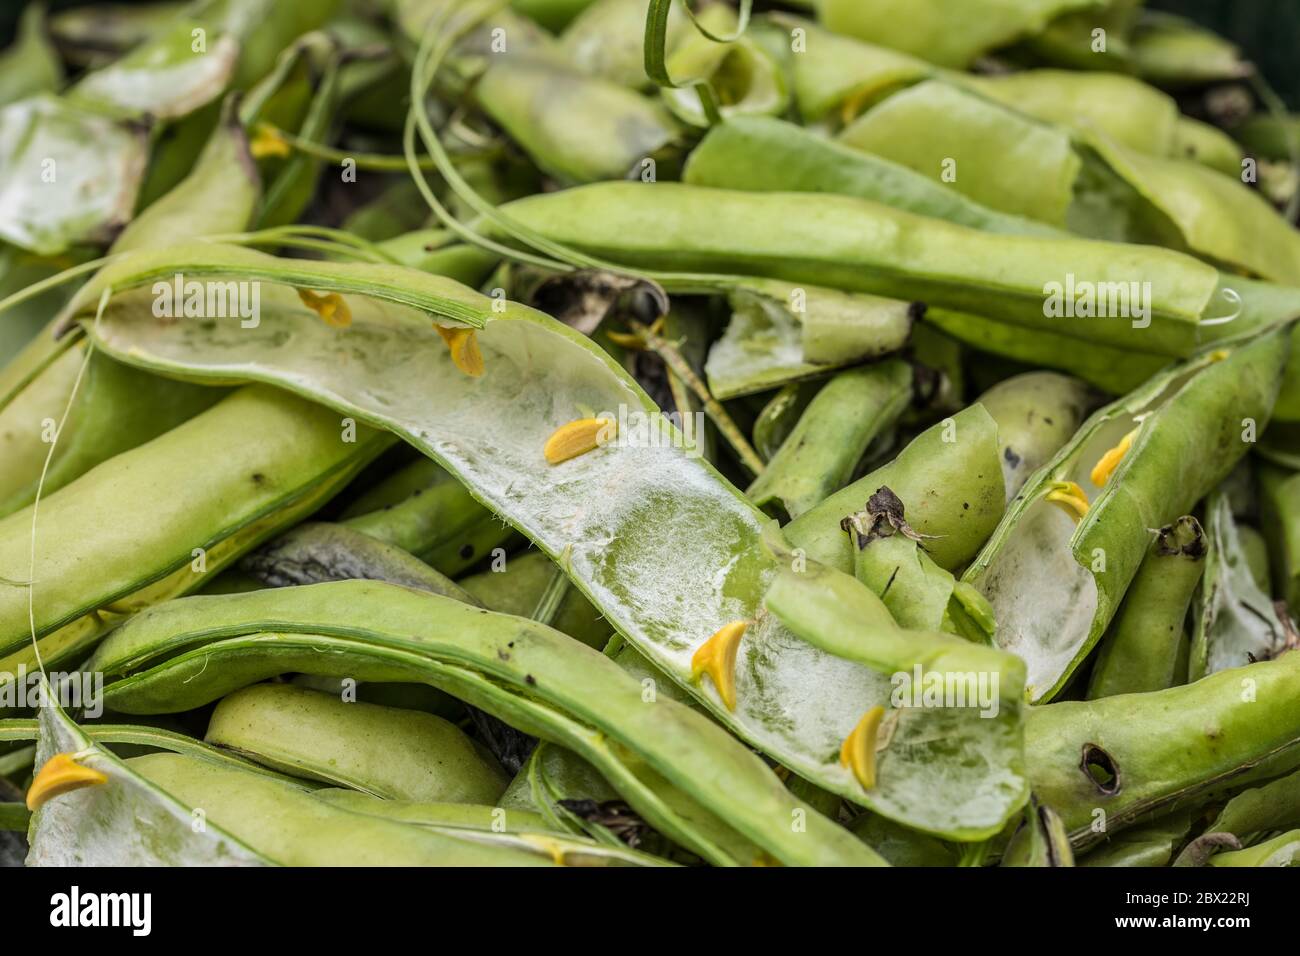 London, UK. 4 June, 2020. A pile of empty broad bean pods/shells after the removal of the beans. David Rowe/Alamy Stock image. Stock Photo